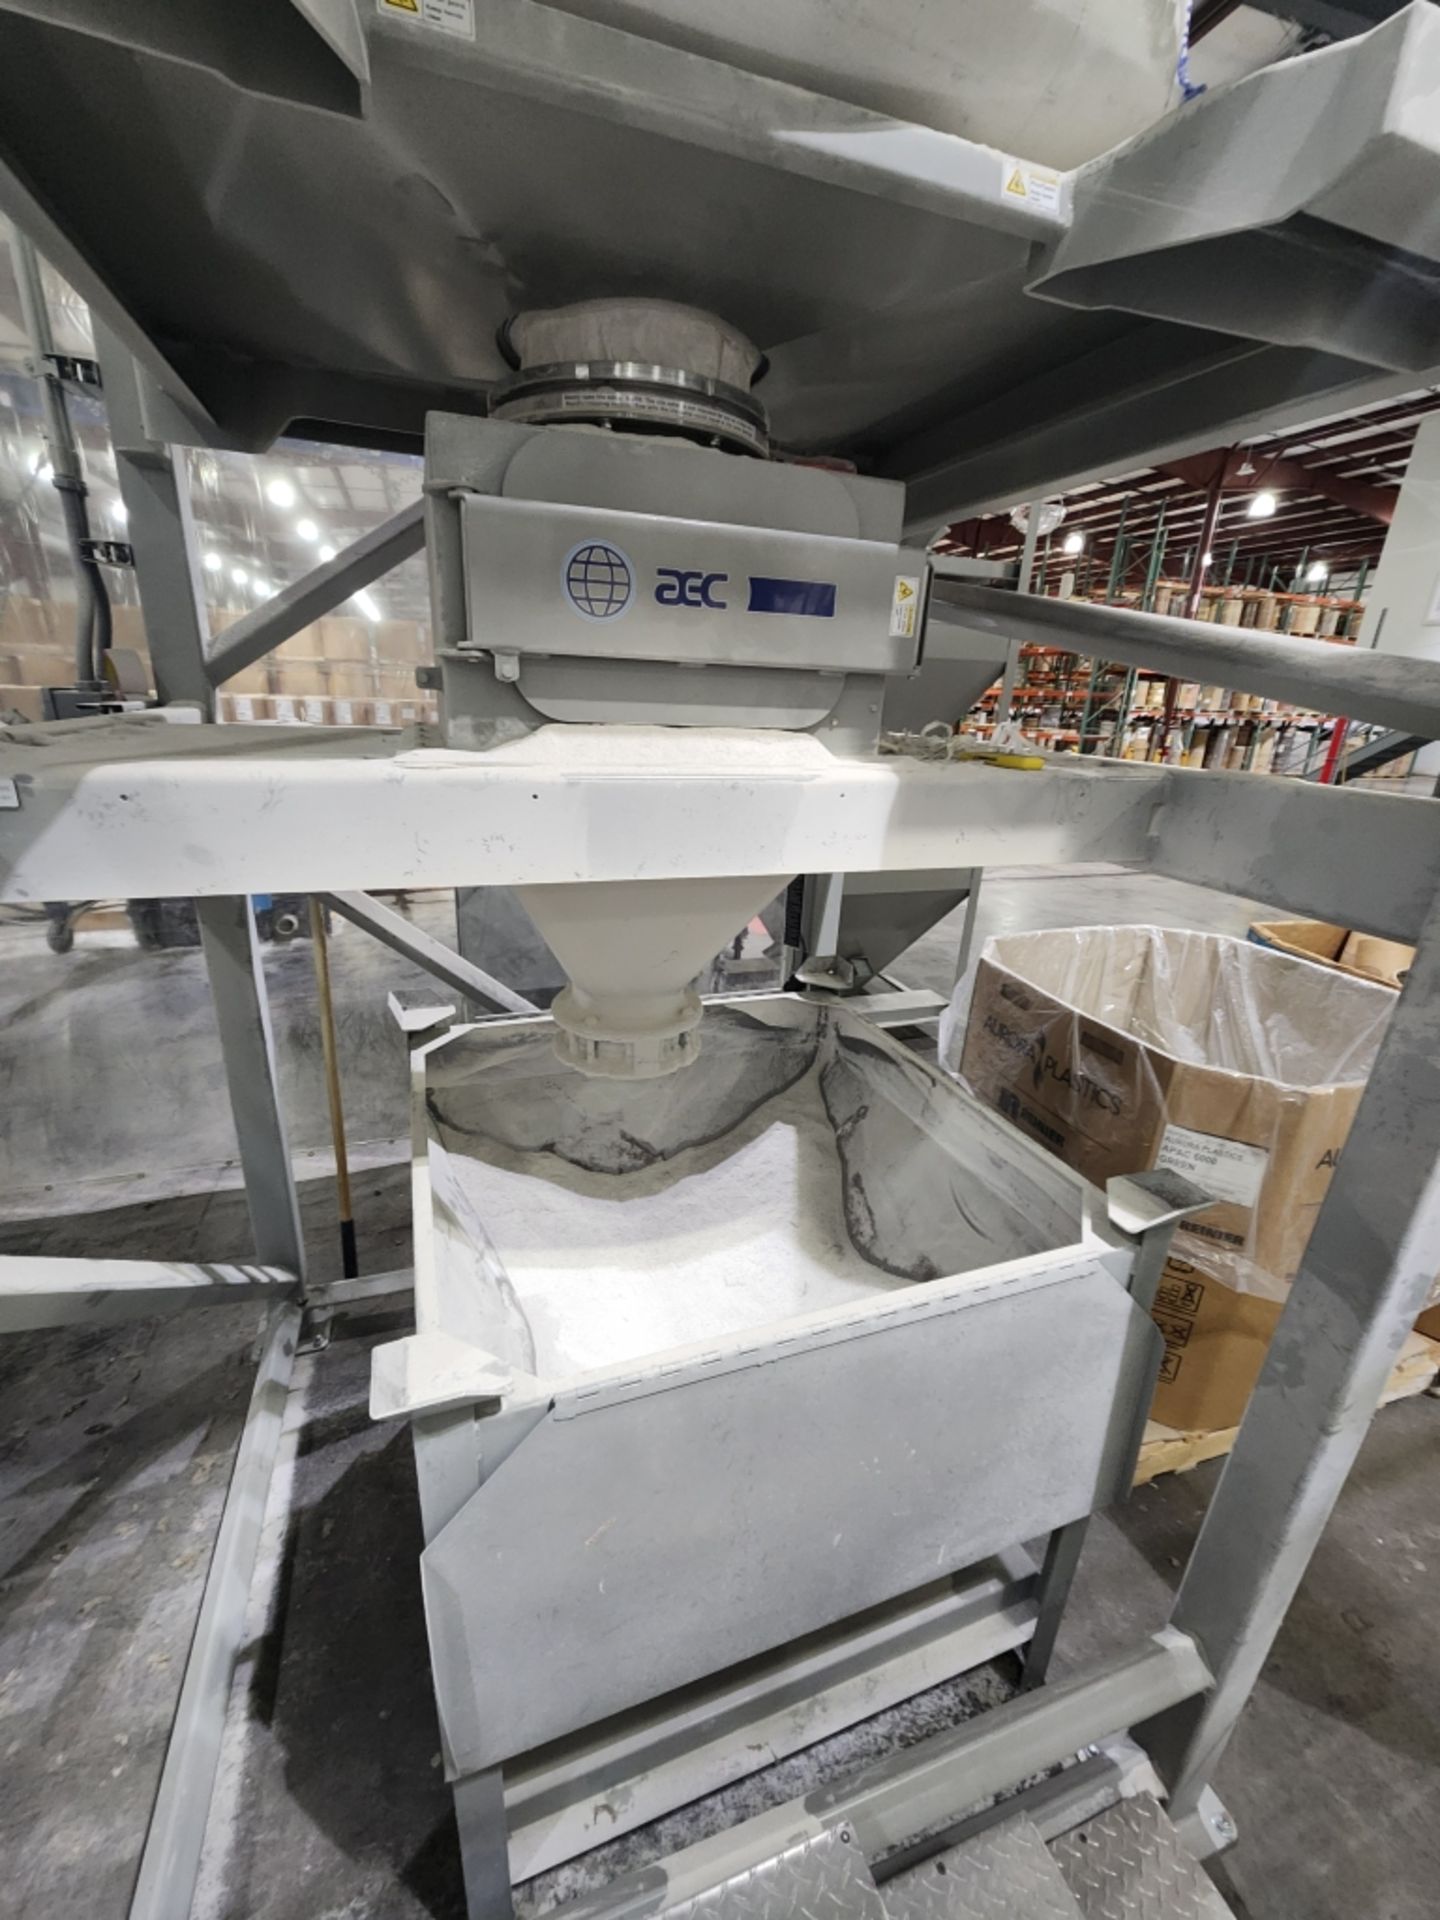 AEC bulk bag unloader system, Model: A248675-01C SN: E101810227-3-1, with five spare bins - Image 5 of 8